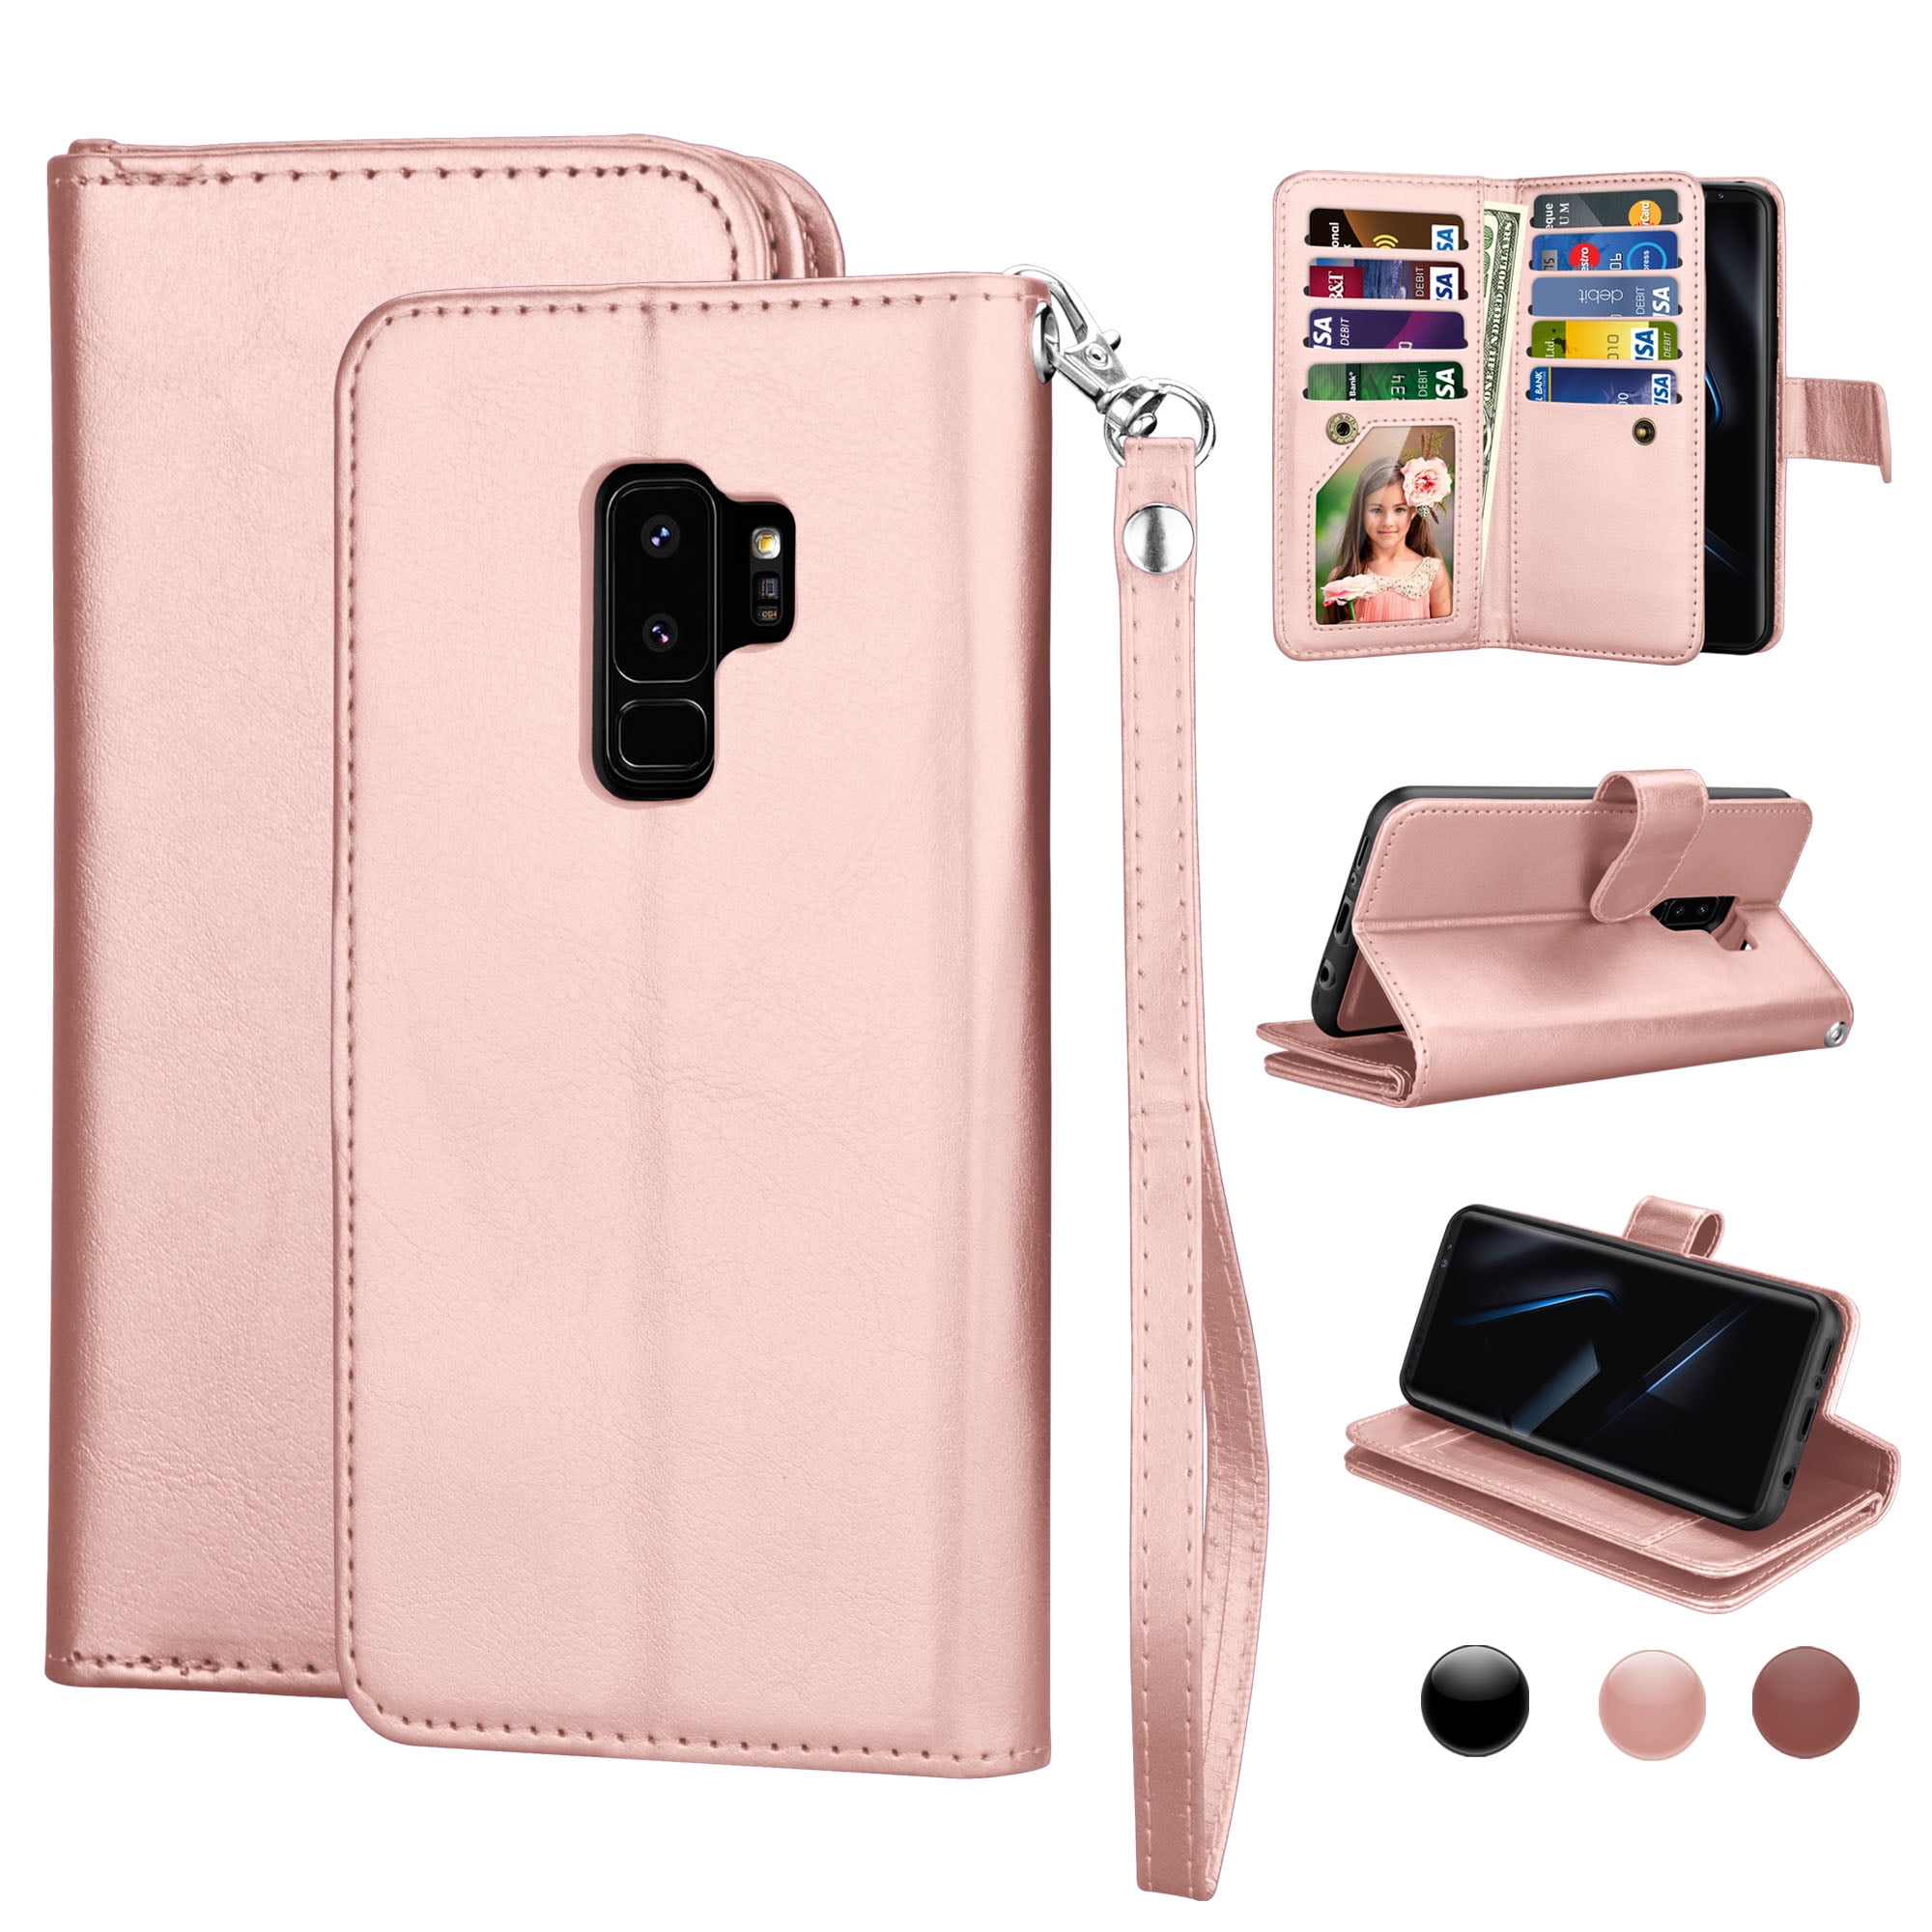 Leather Flip Case Fit for Samsung Galaxy S9 Plus owl Wallet Cover for Samsung Galaxy S9 Plus 